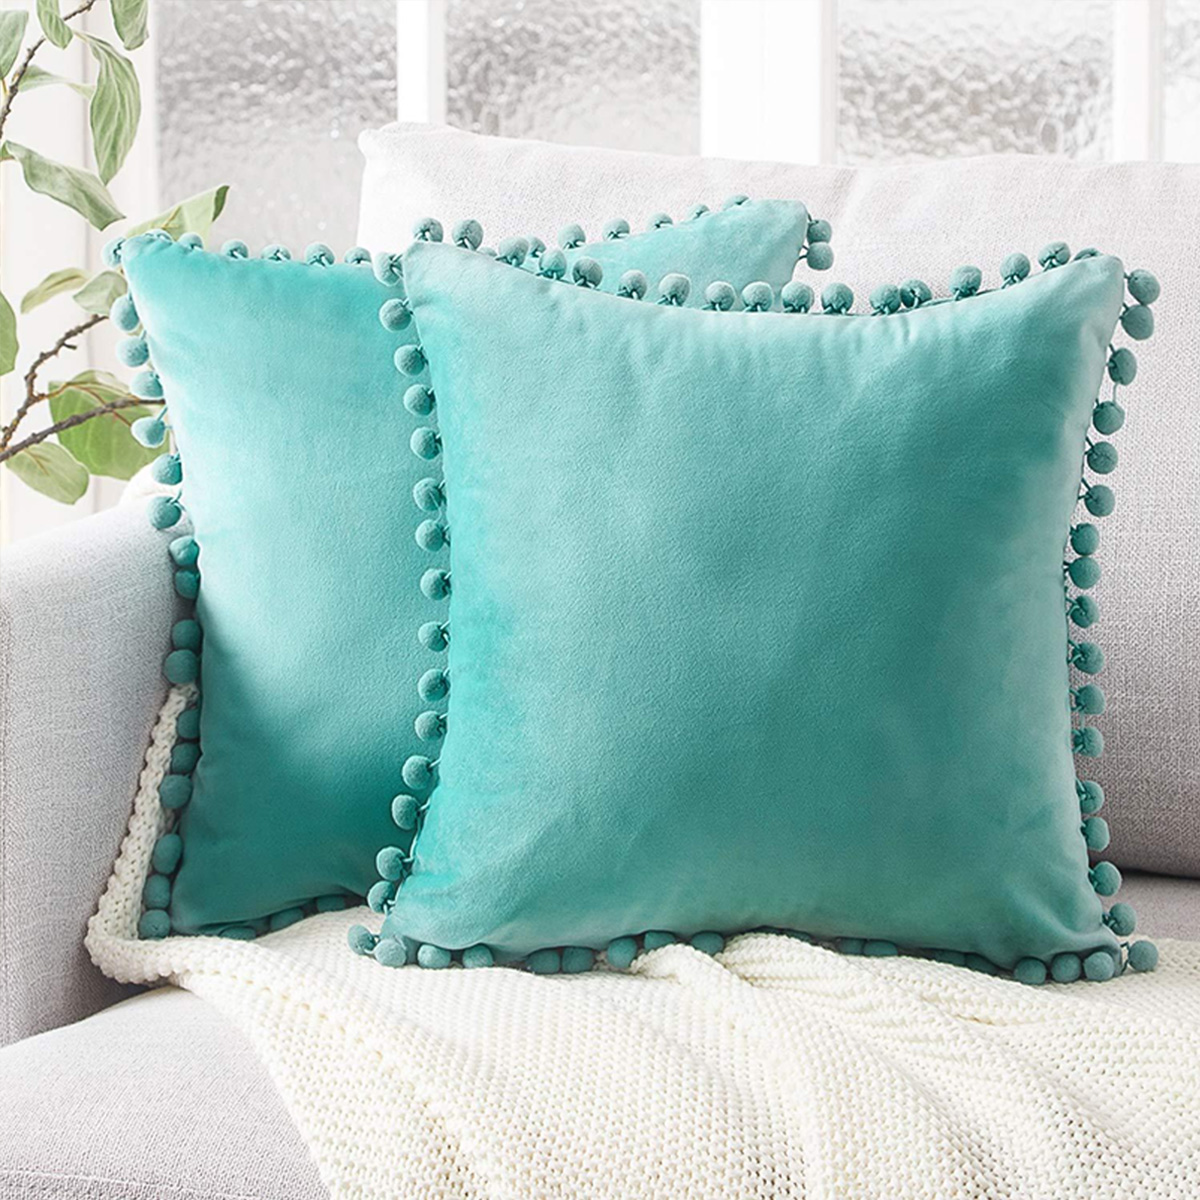 4545cm-Soft-Velvet-Pillow-Covers-Cute-Pom-Poms-Throw-Pillow-Covers-Square-Cushion-Case-for-Sofa-Couc-1779027-8